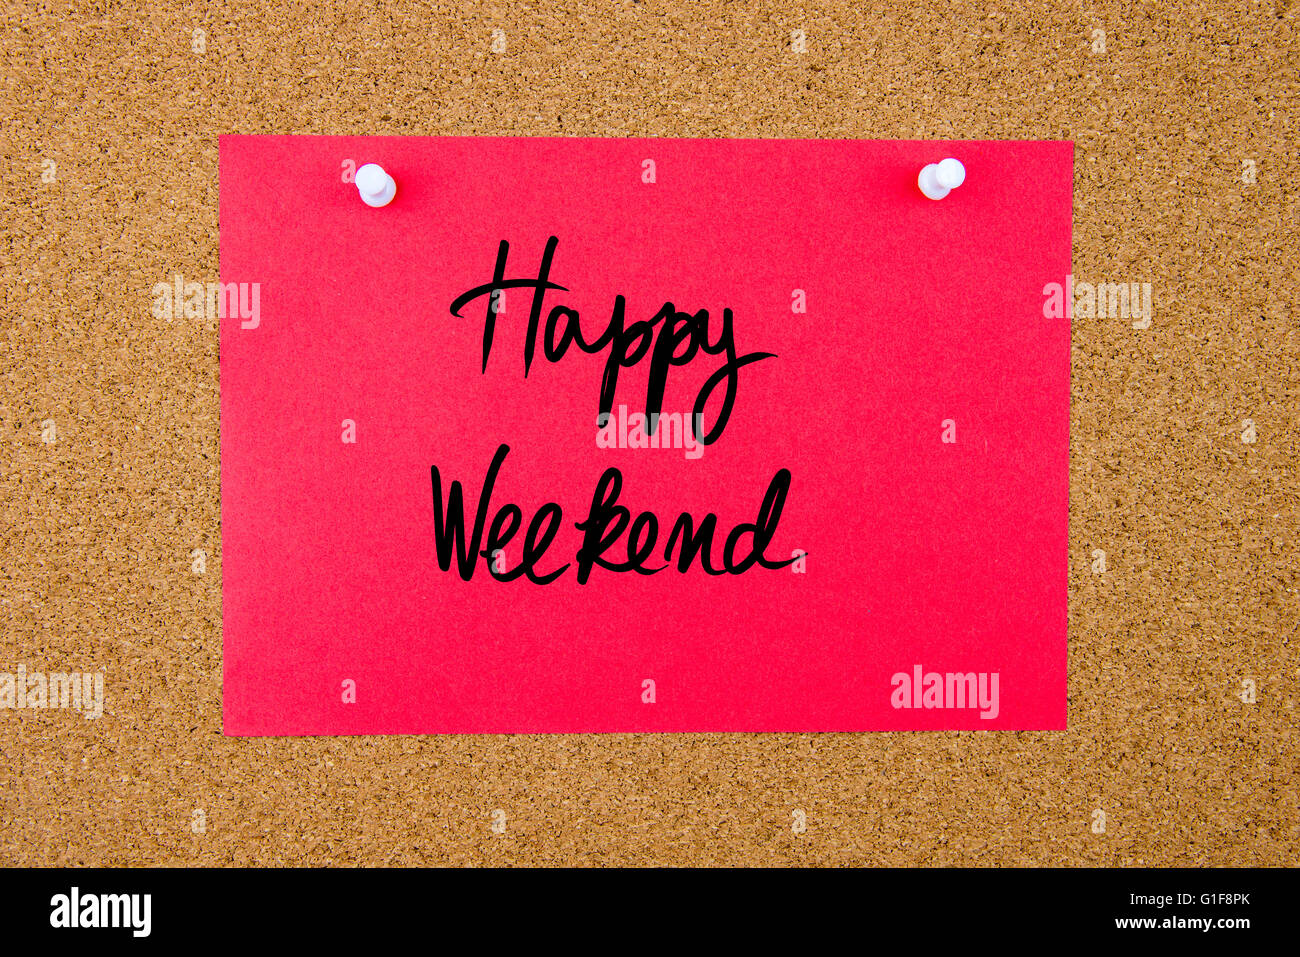 Red paper note with handwritten text Happy Weekend pinned on cork board with white thumbtacks Stock Photo